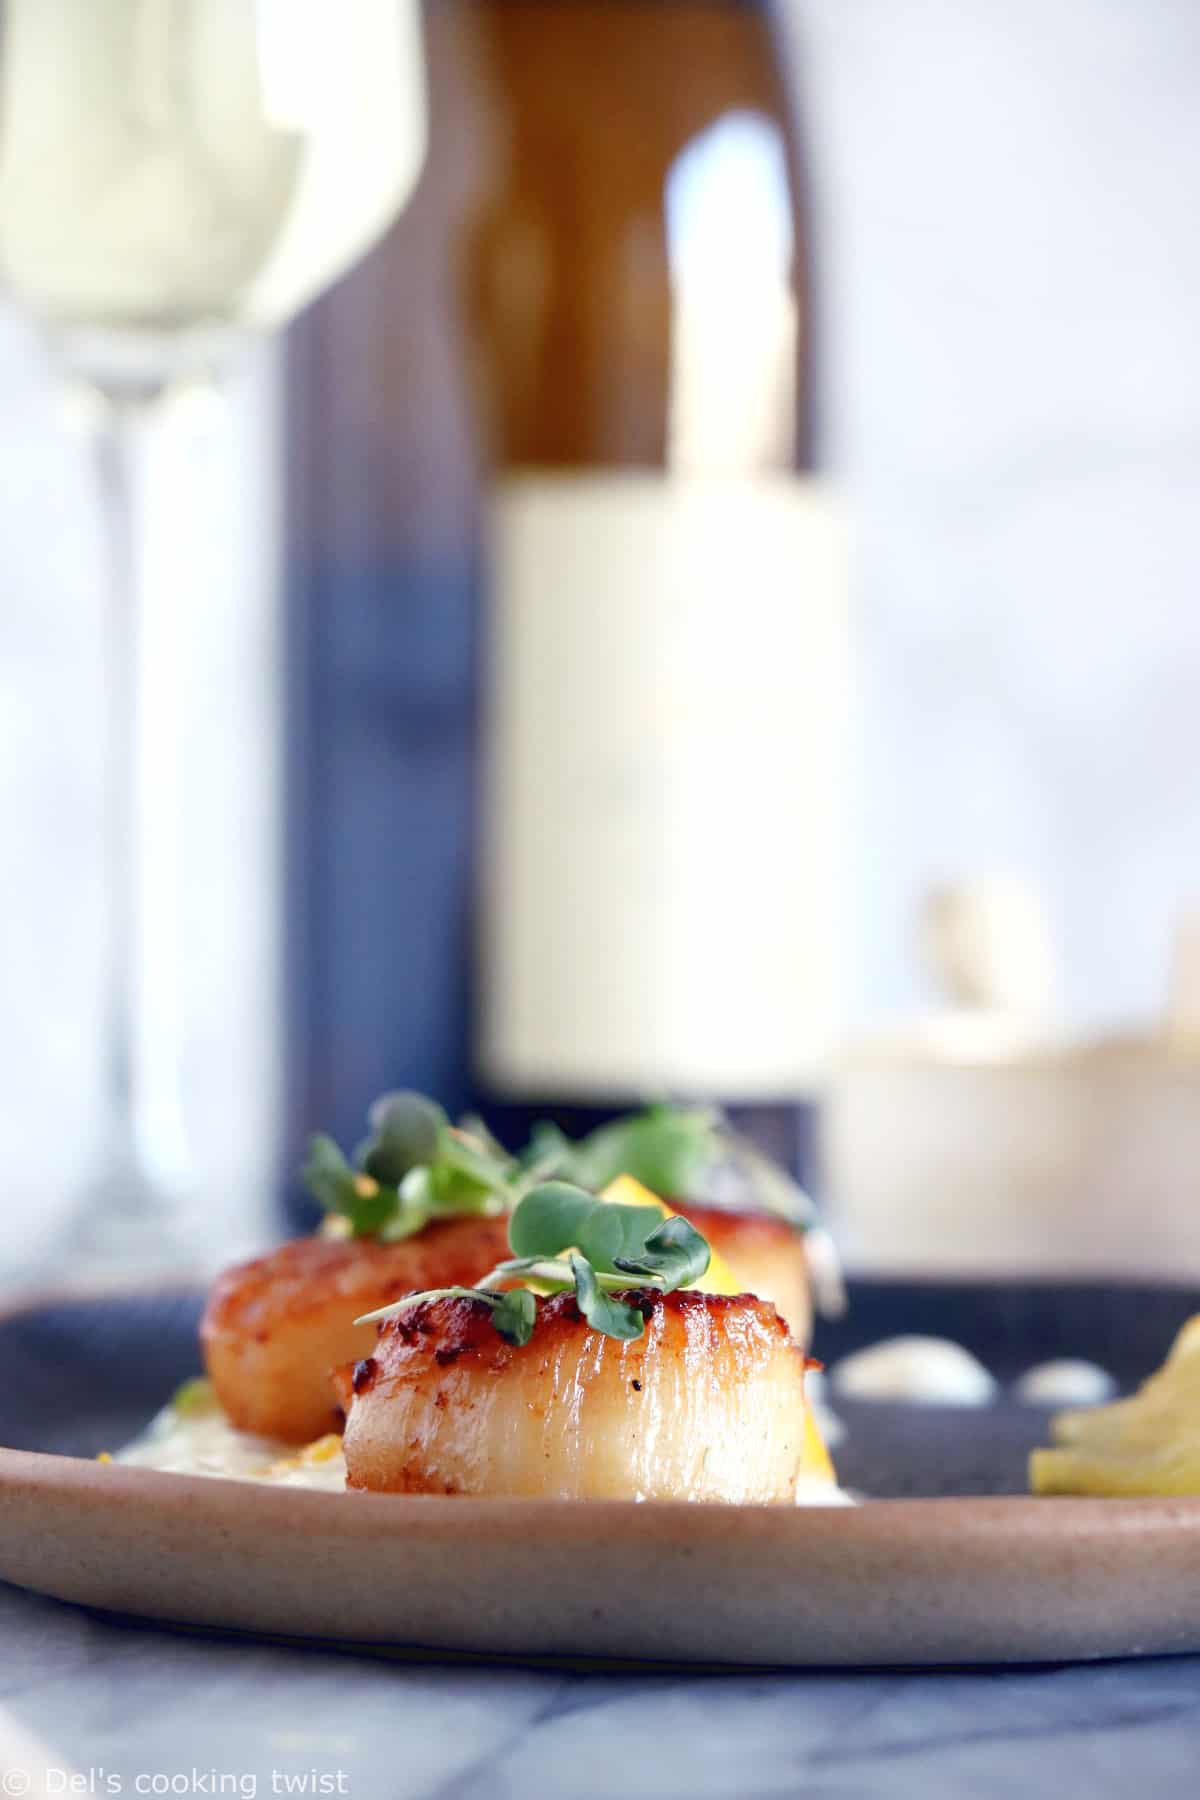 Pan-seared scallops with an orange ginger sauce is a light, elegant dish, enhanced with citrus flavors. Ready under 20 minutes, it's a lovely starter to a 3-course dinner.